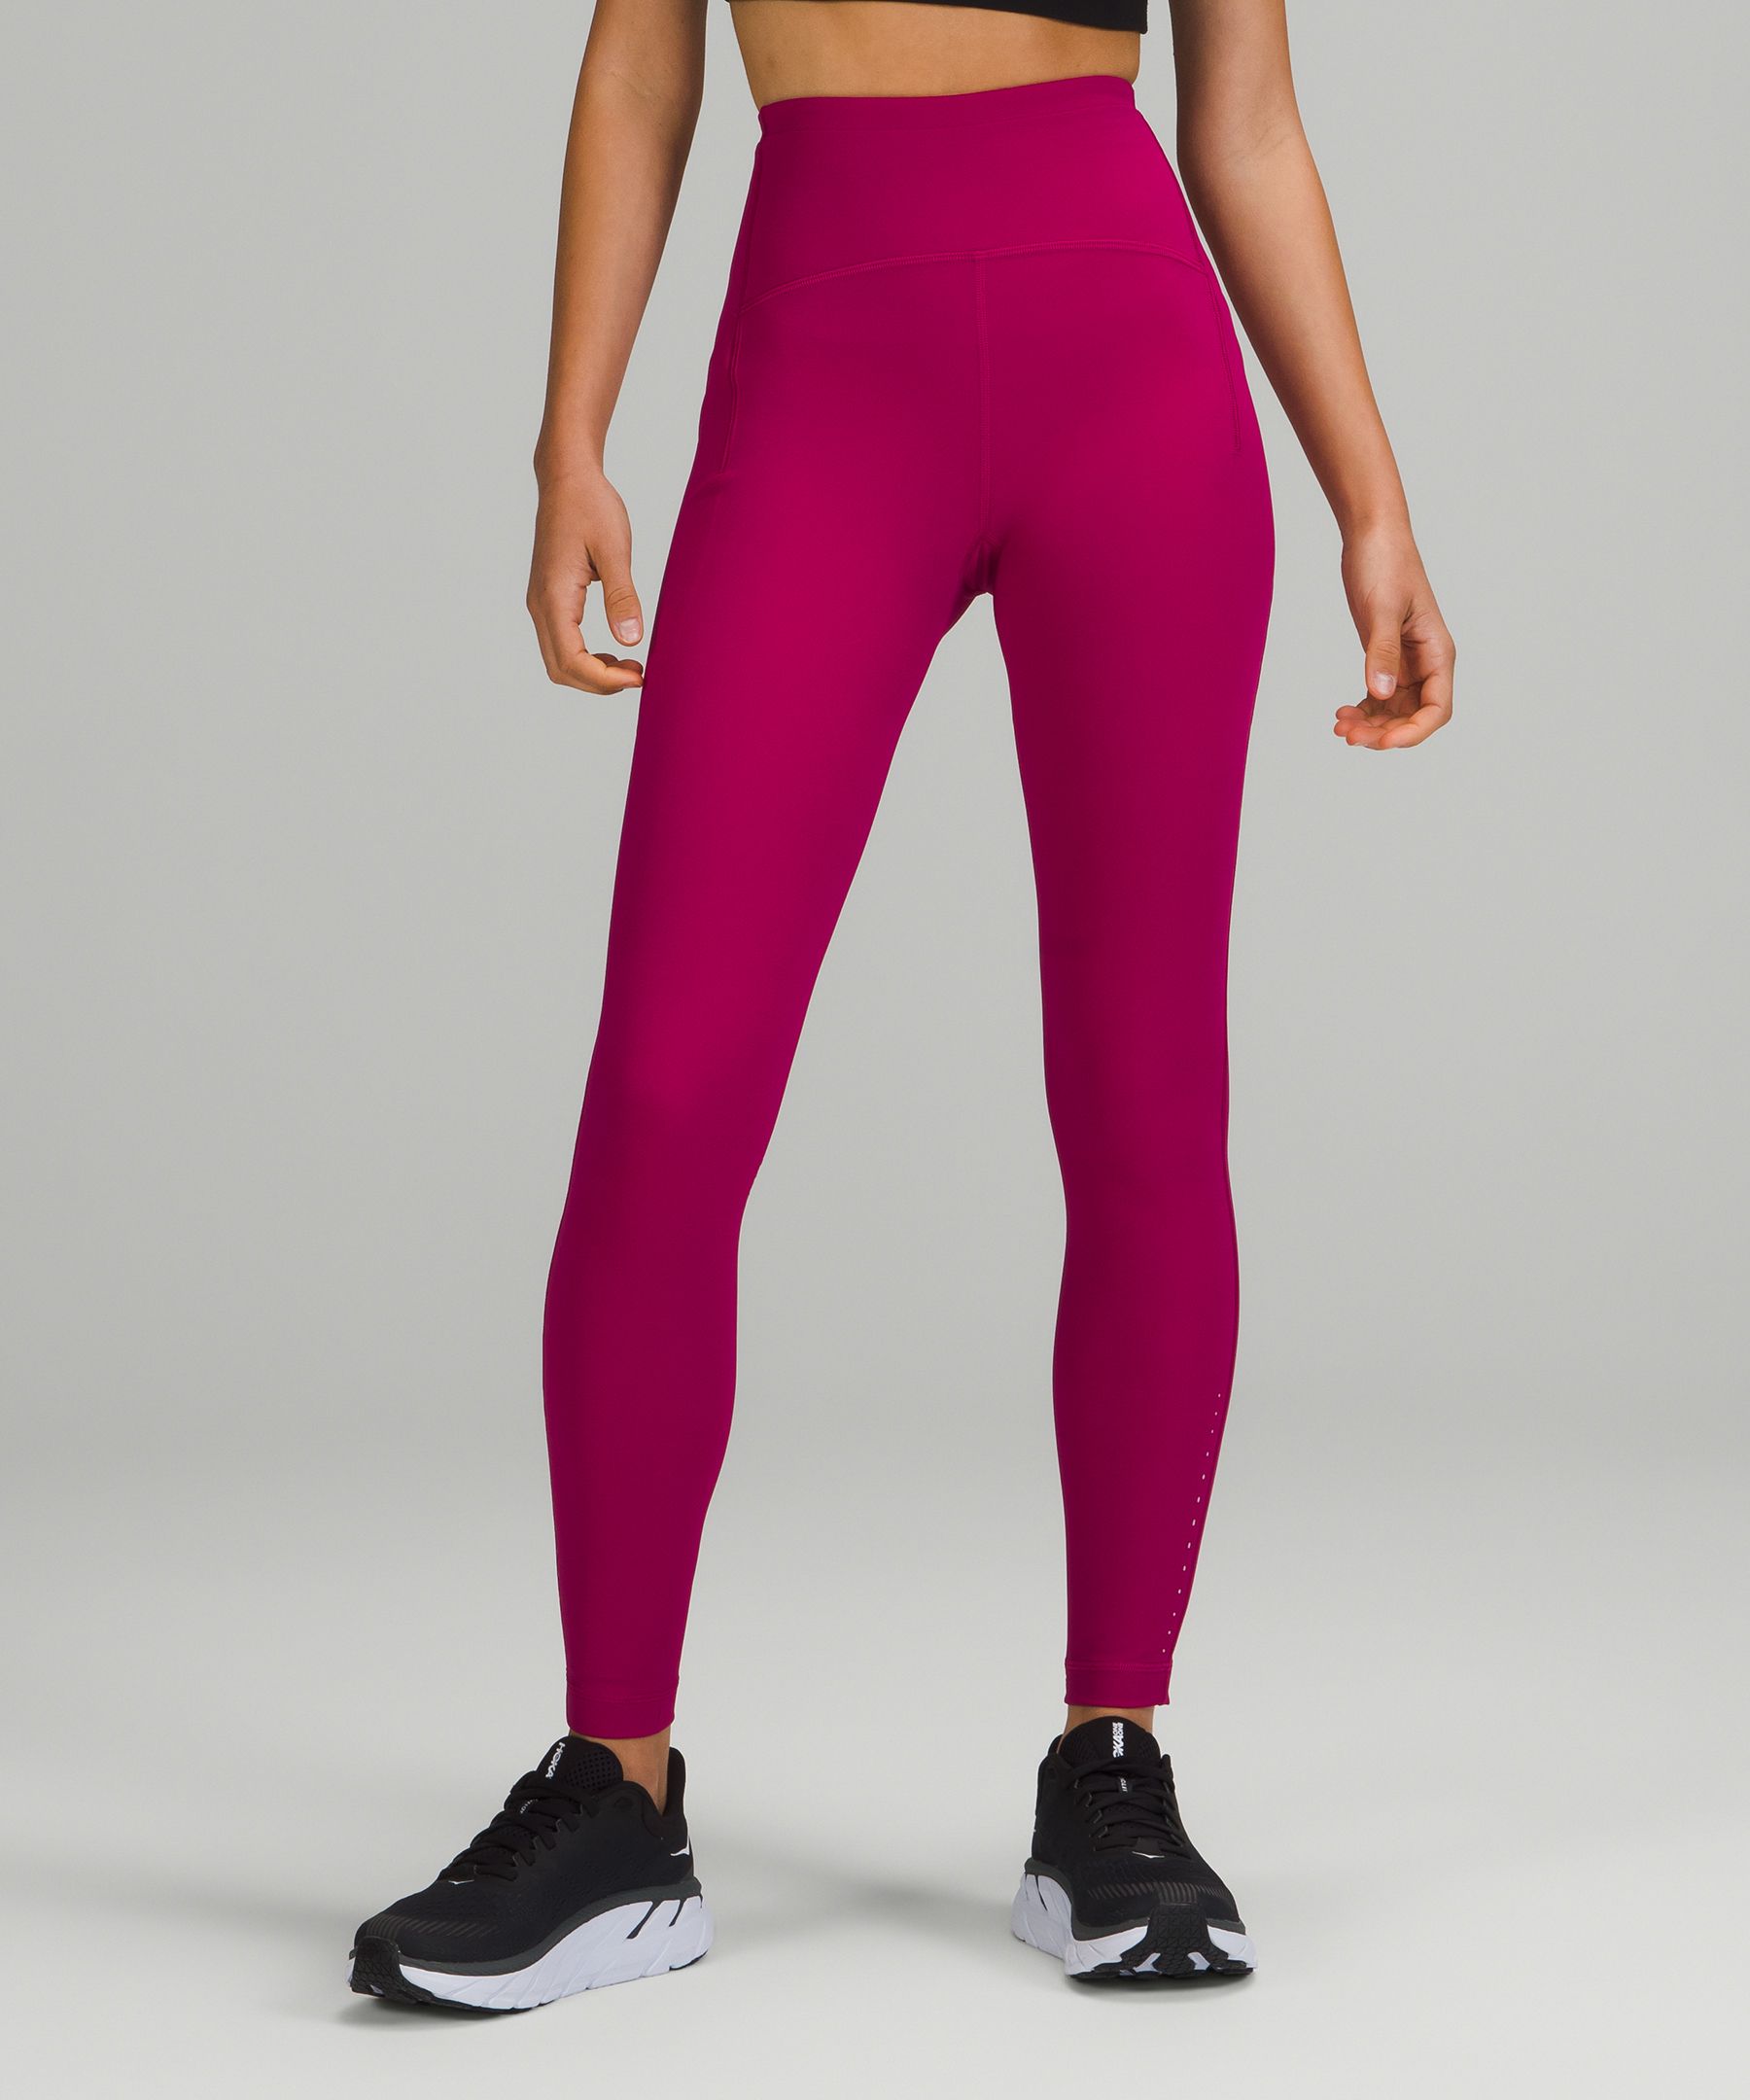 Lululemon's new running apparel for women thats great for sum